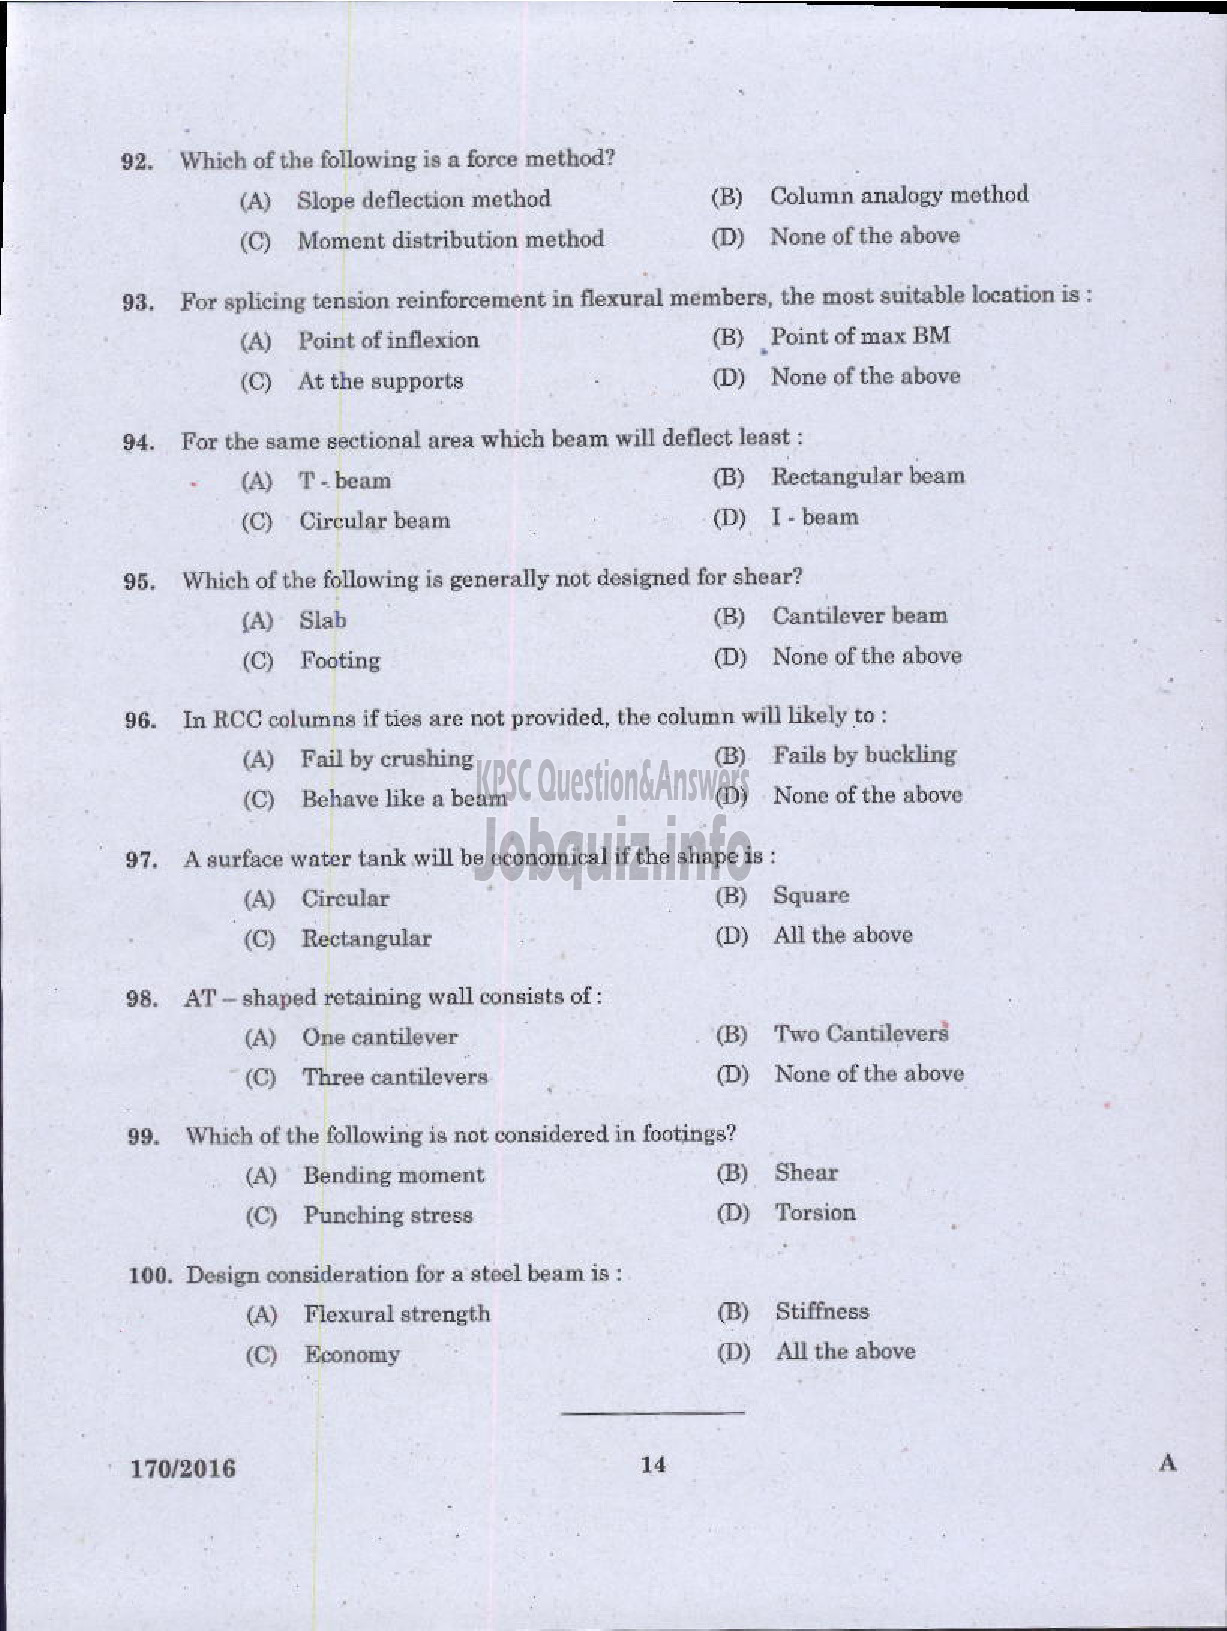 Kerala PSC Question Paper - LECTURER IN CIVIL ENGINEERING GOVT POLYTECHNICS TECHNICAL EDUCATION-12